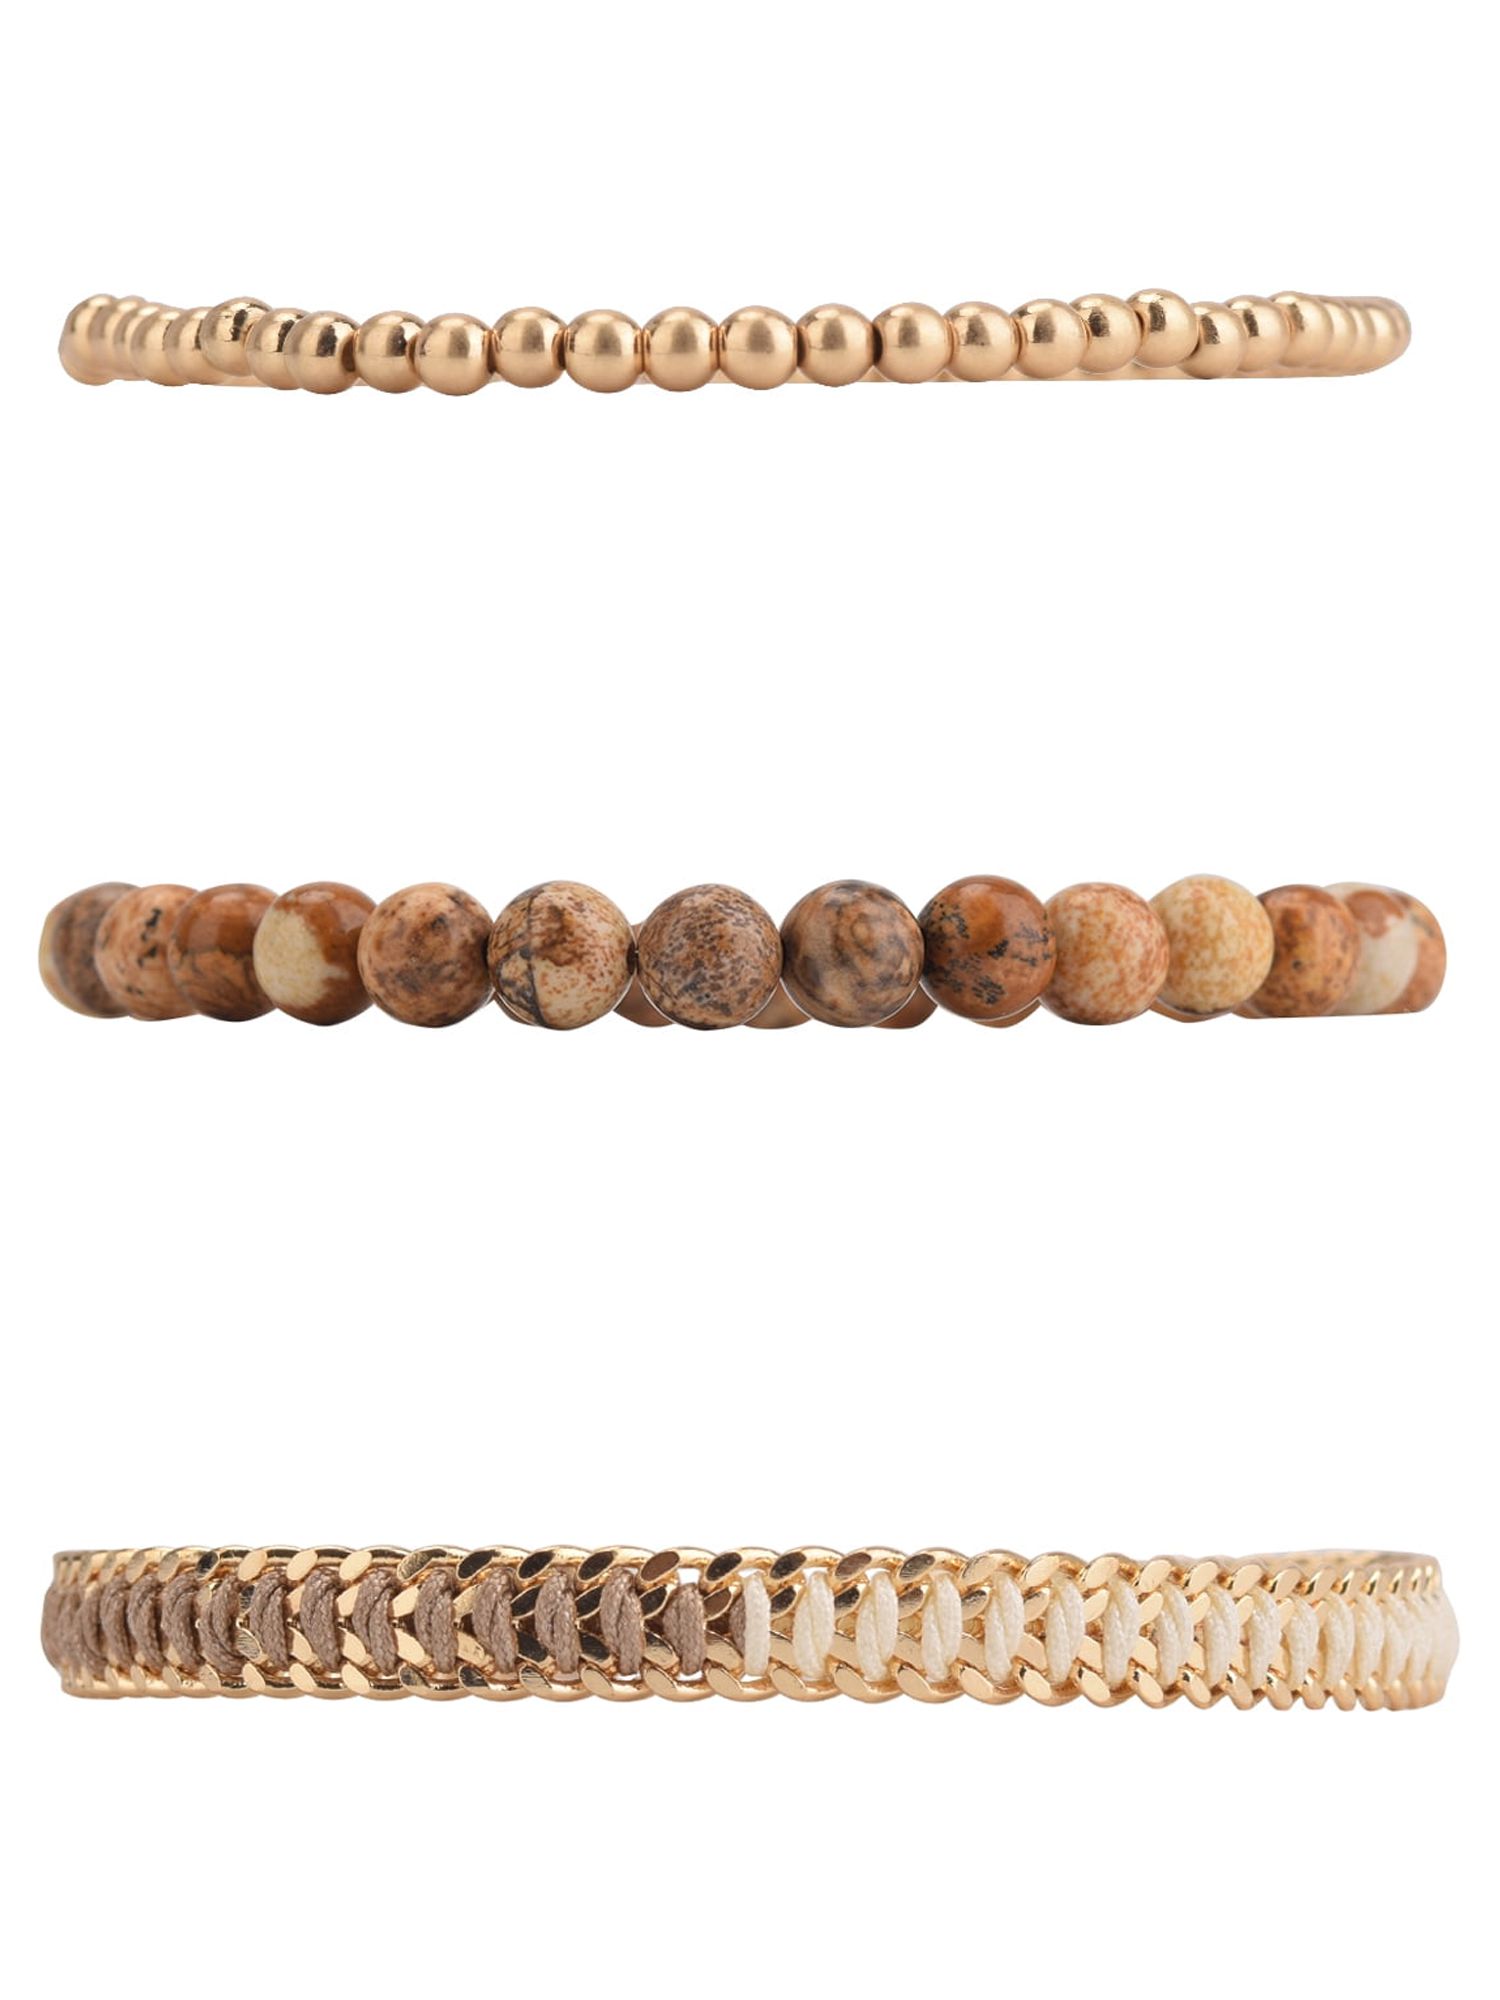 The Pioneer Woman - Women's Jewelry, Soft Gold-tone Bracelet Set with Genuine Stone Beads - image 4 of 7